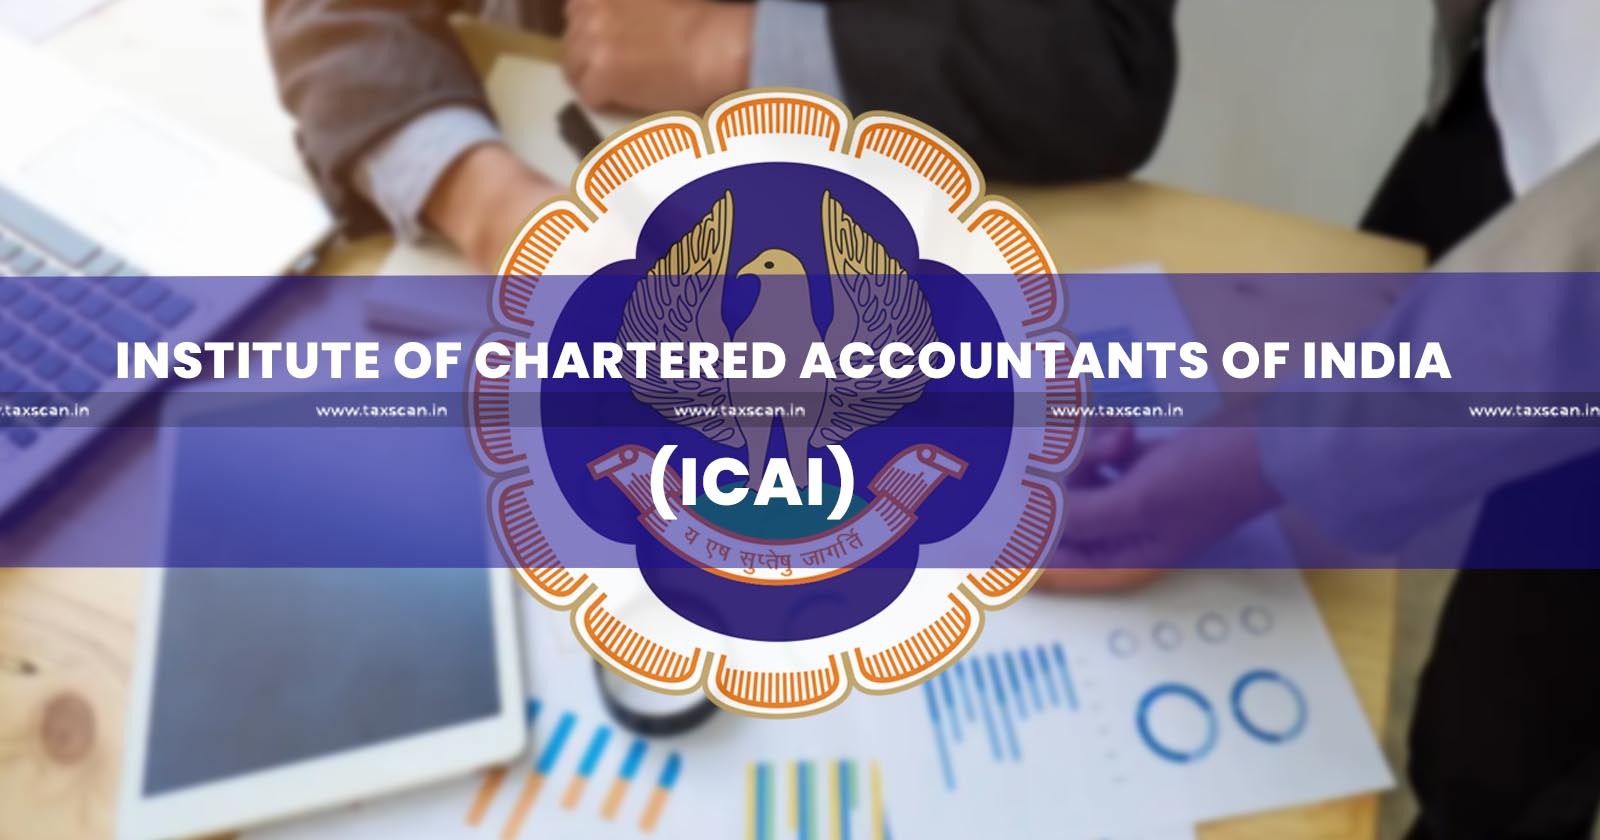 Tax - Interests - Business- Relations - Entities - Business- Connections - Company -Guilty - Misconduct-ICAI-taxscan